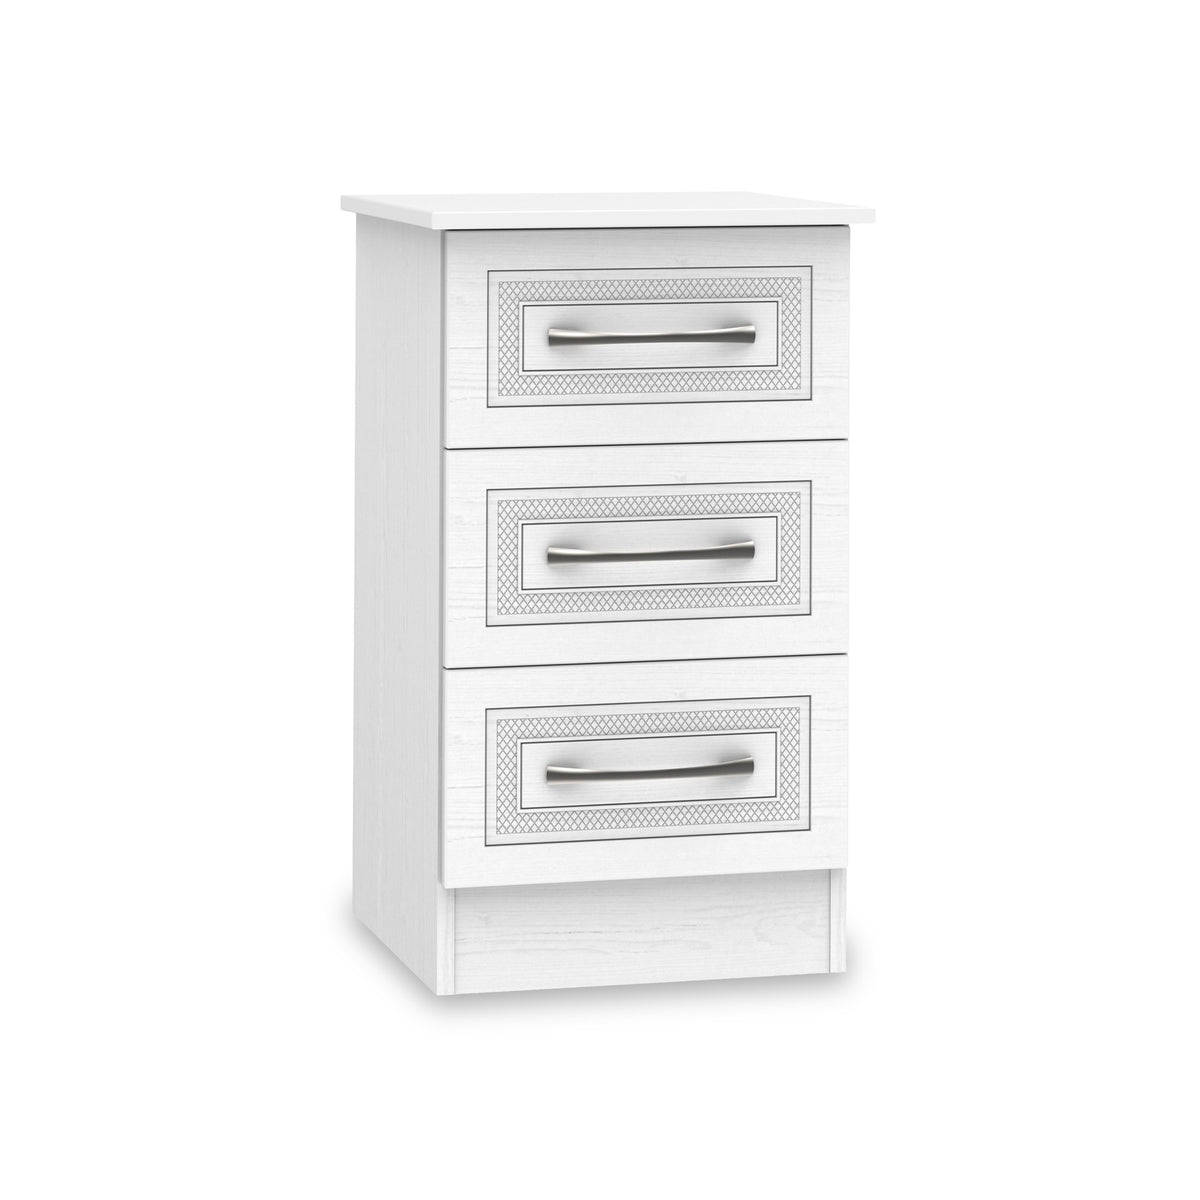 Kilgarth White 3 Drawer Bedside with Wireless Charging by Roseland Furniture